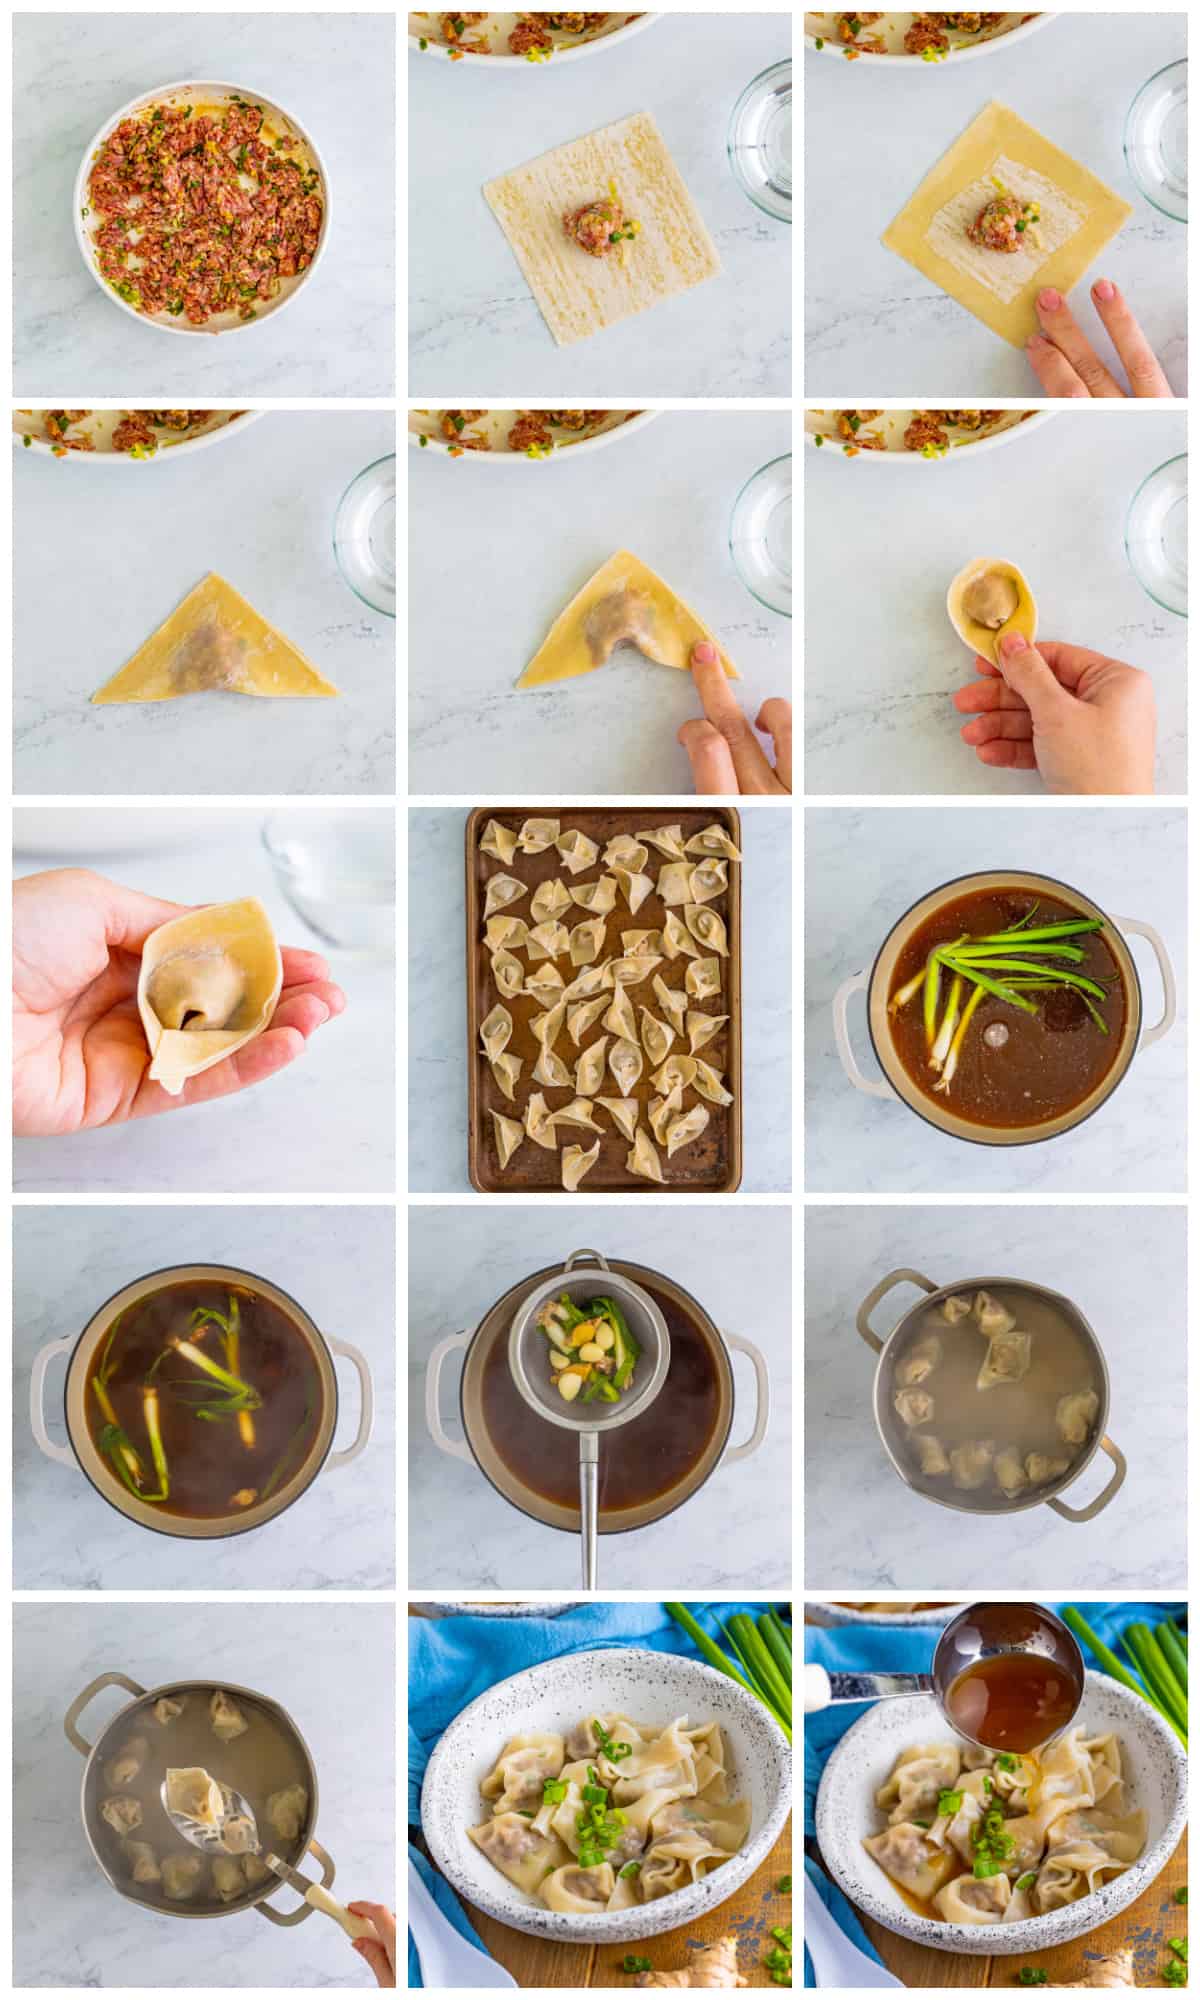 Step by step photos on how to make Wonton Soup.